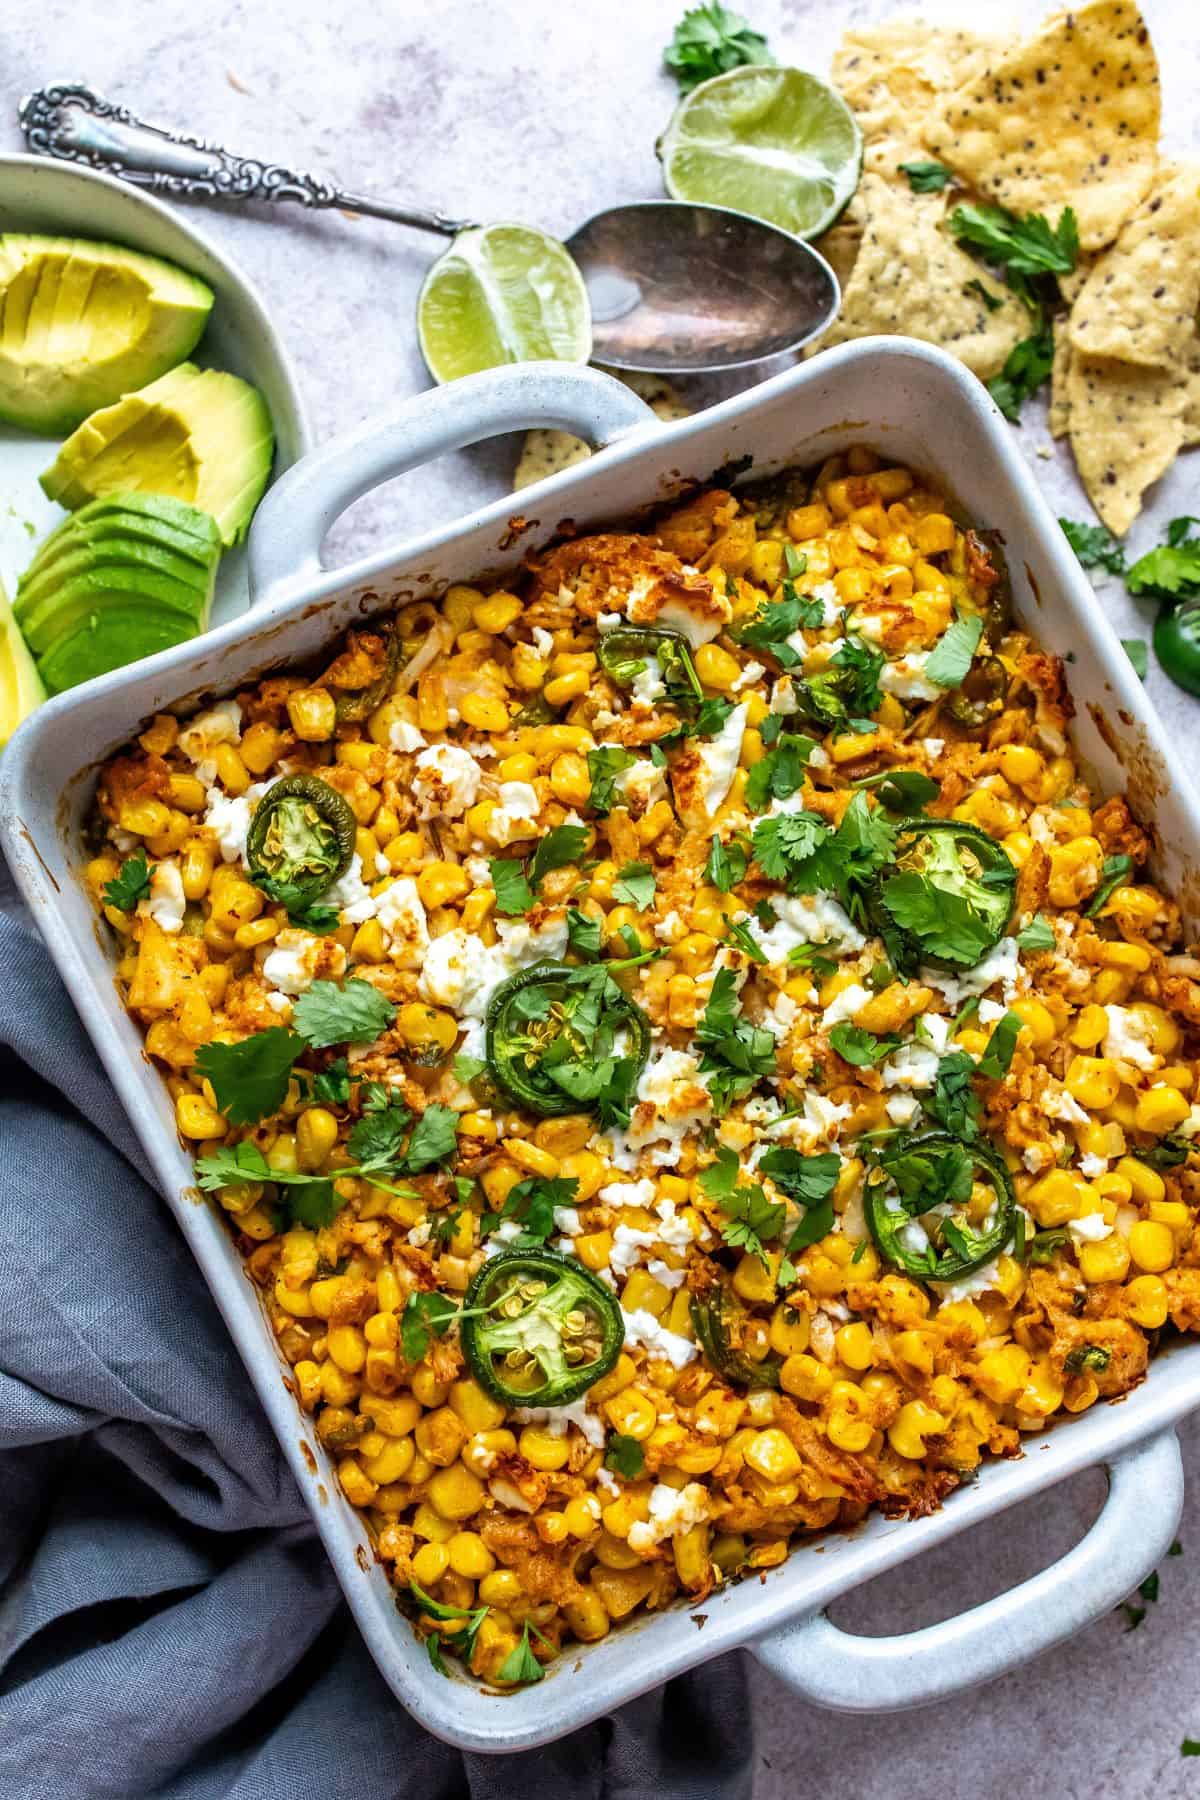 An image of Mexican street corn casserole in a baking dish.